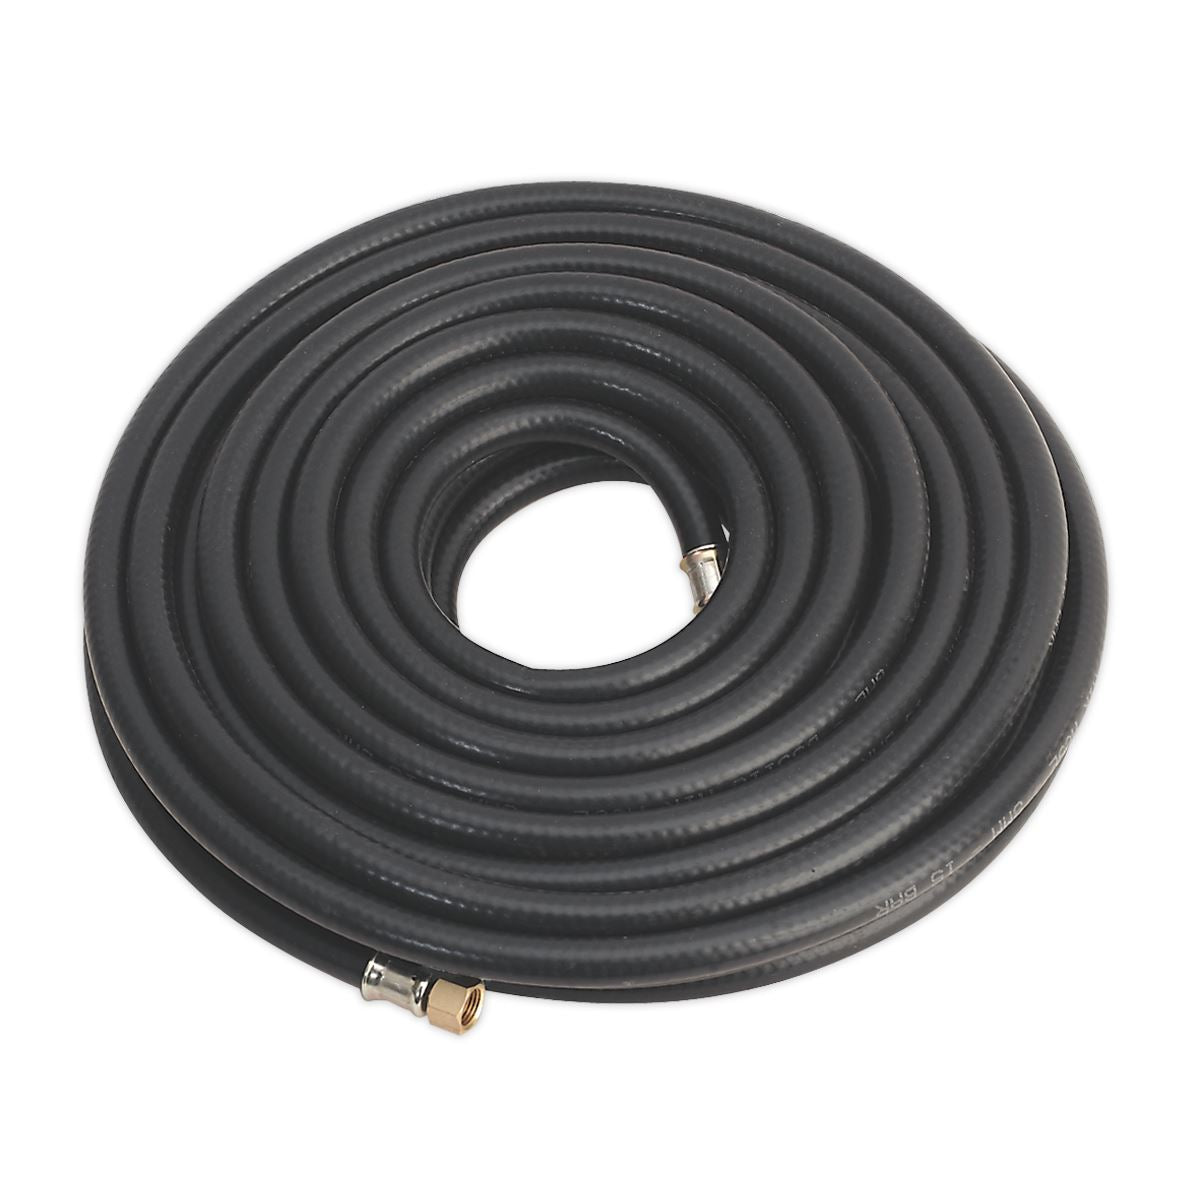 Sealey Air Hose 15m x Ø8mm with 1/4"BSP Unions Heavy-Duty